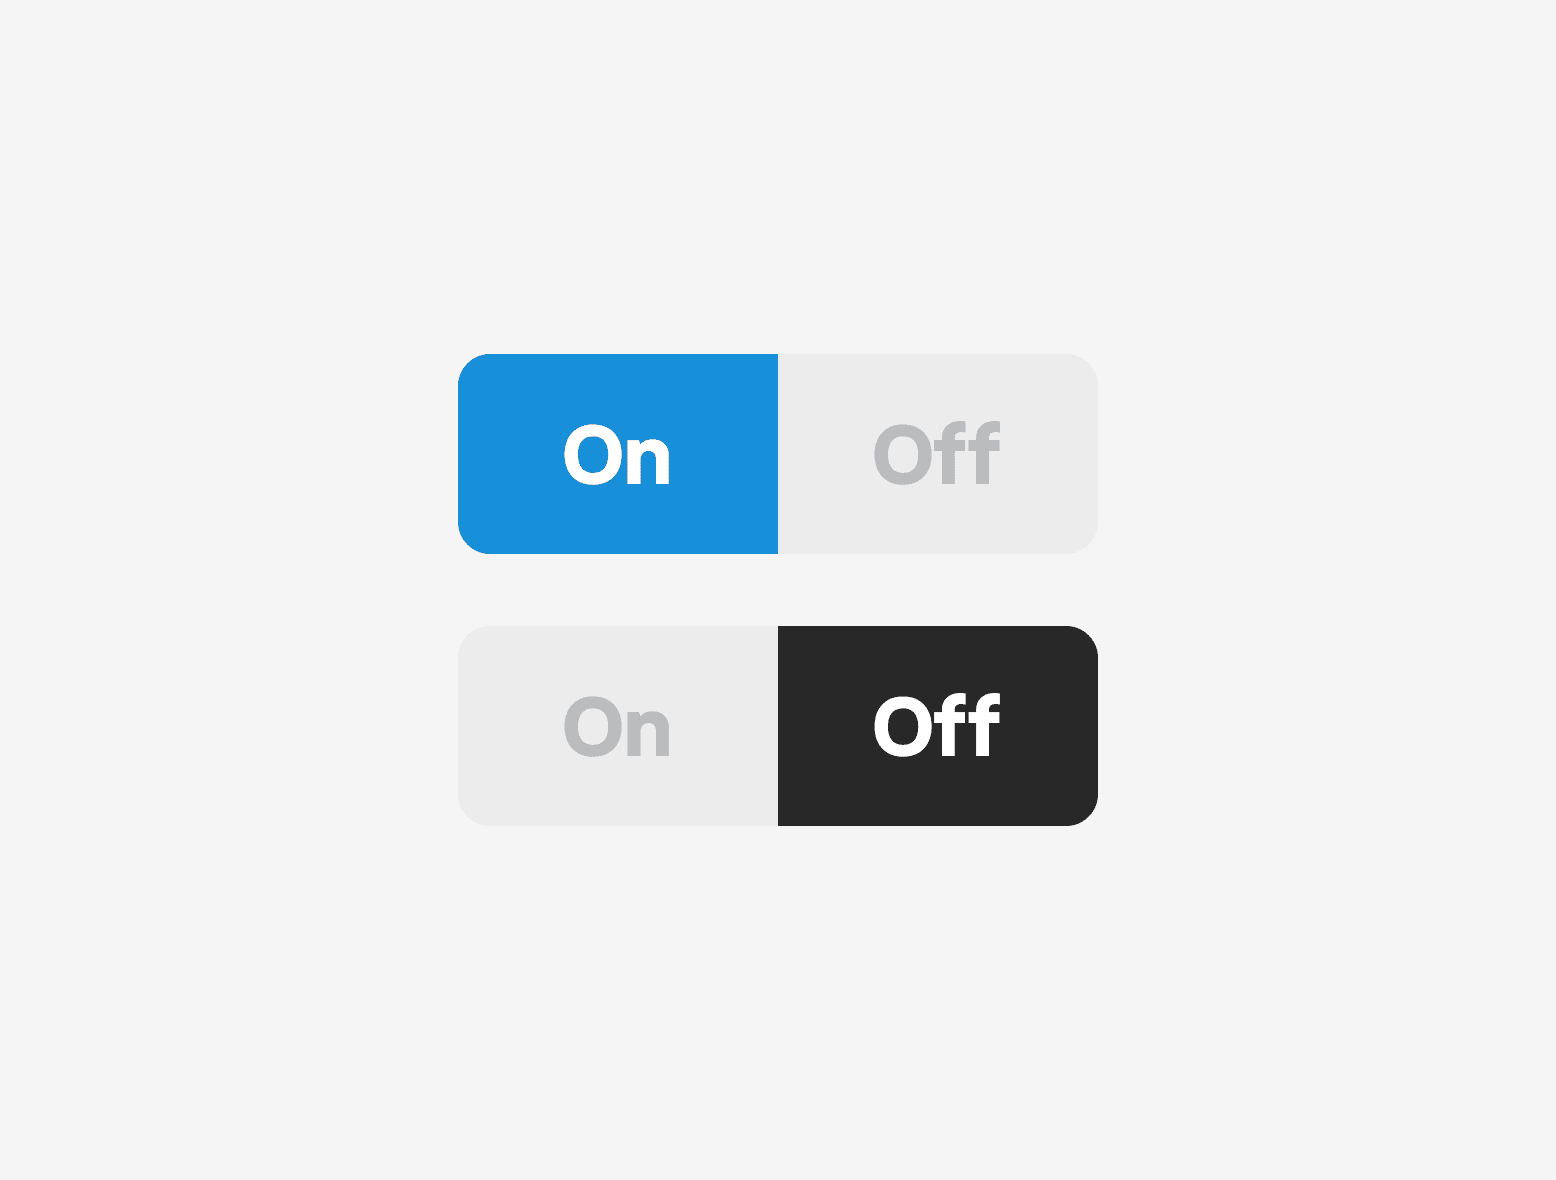 Options On and Off